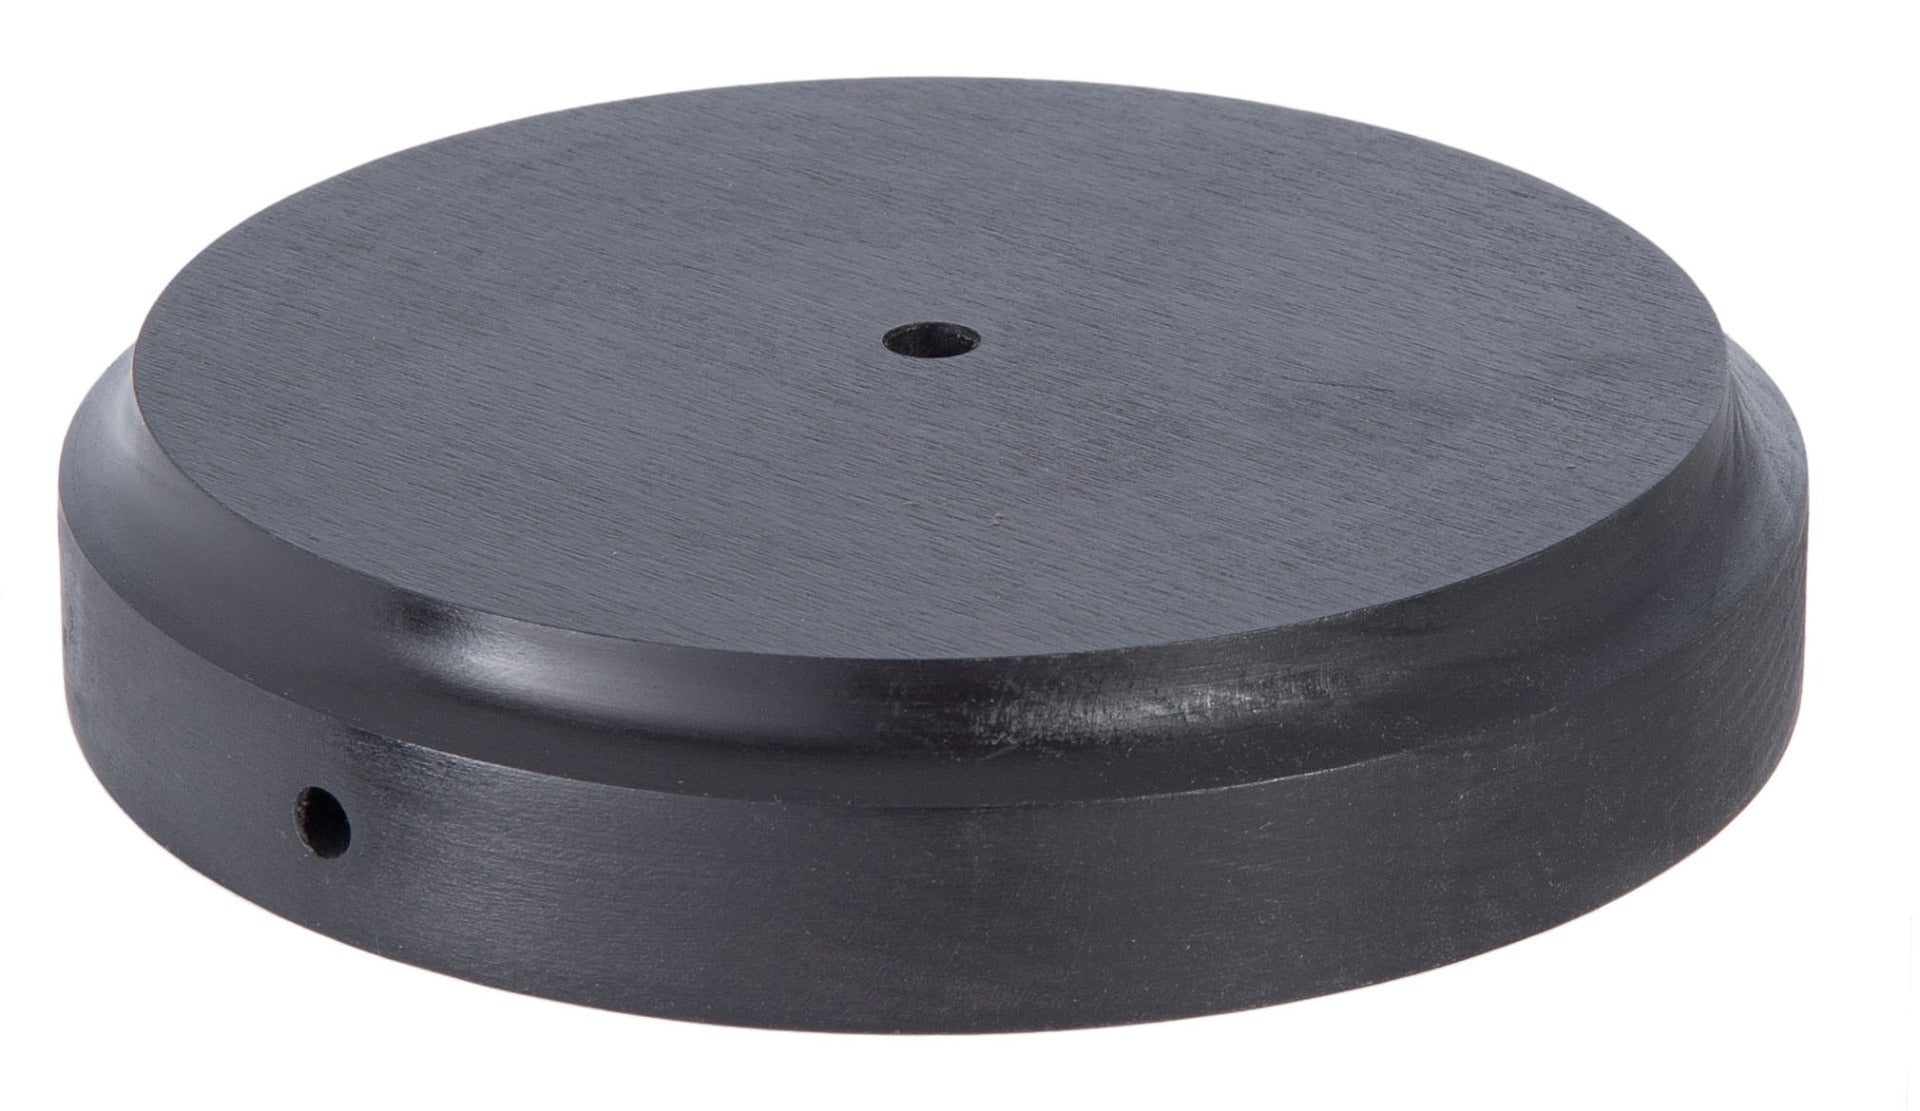 Modern Style Black Wooden Lamp Bases with Tapered Edge, Choice of Size 4 to 9" Top Dia. 